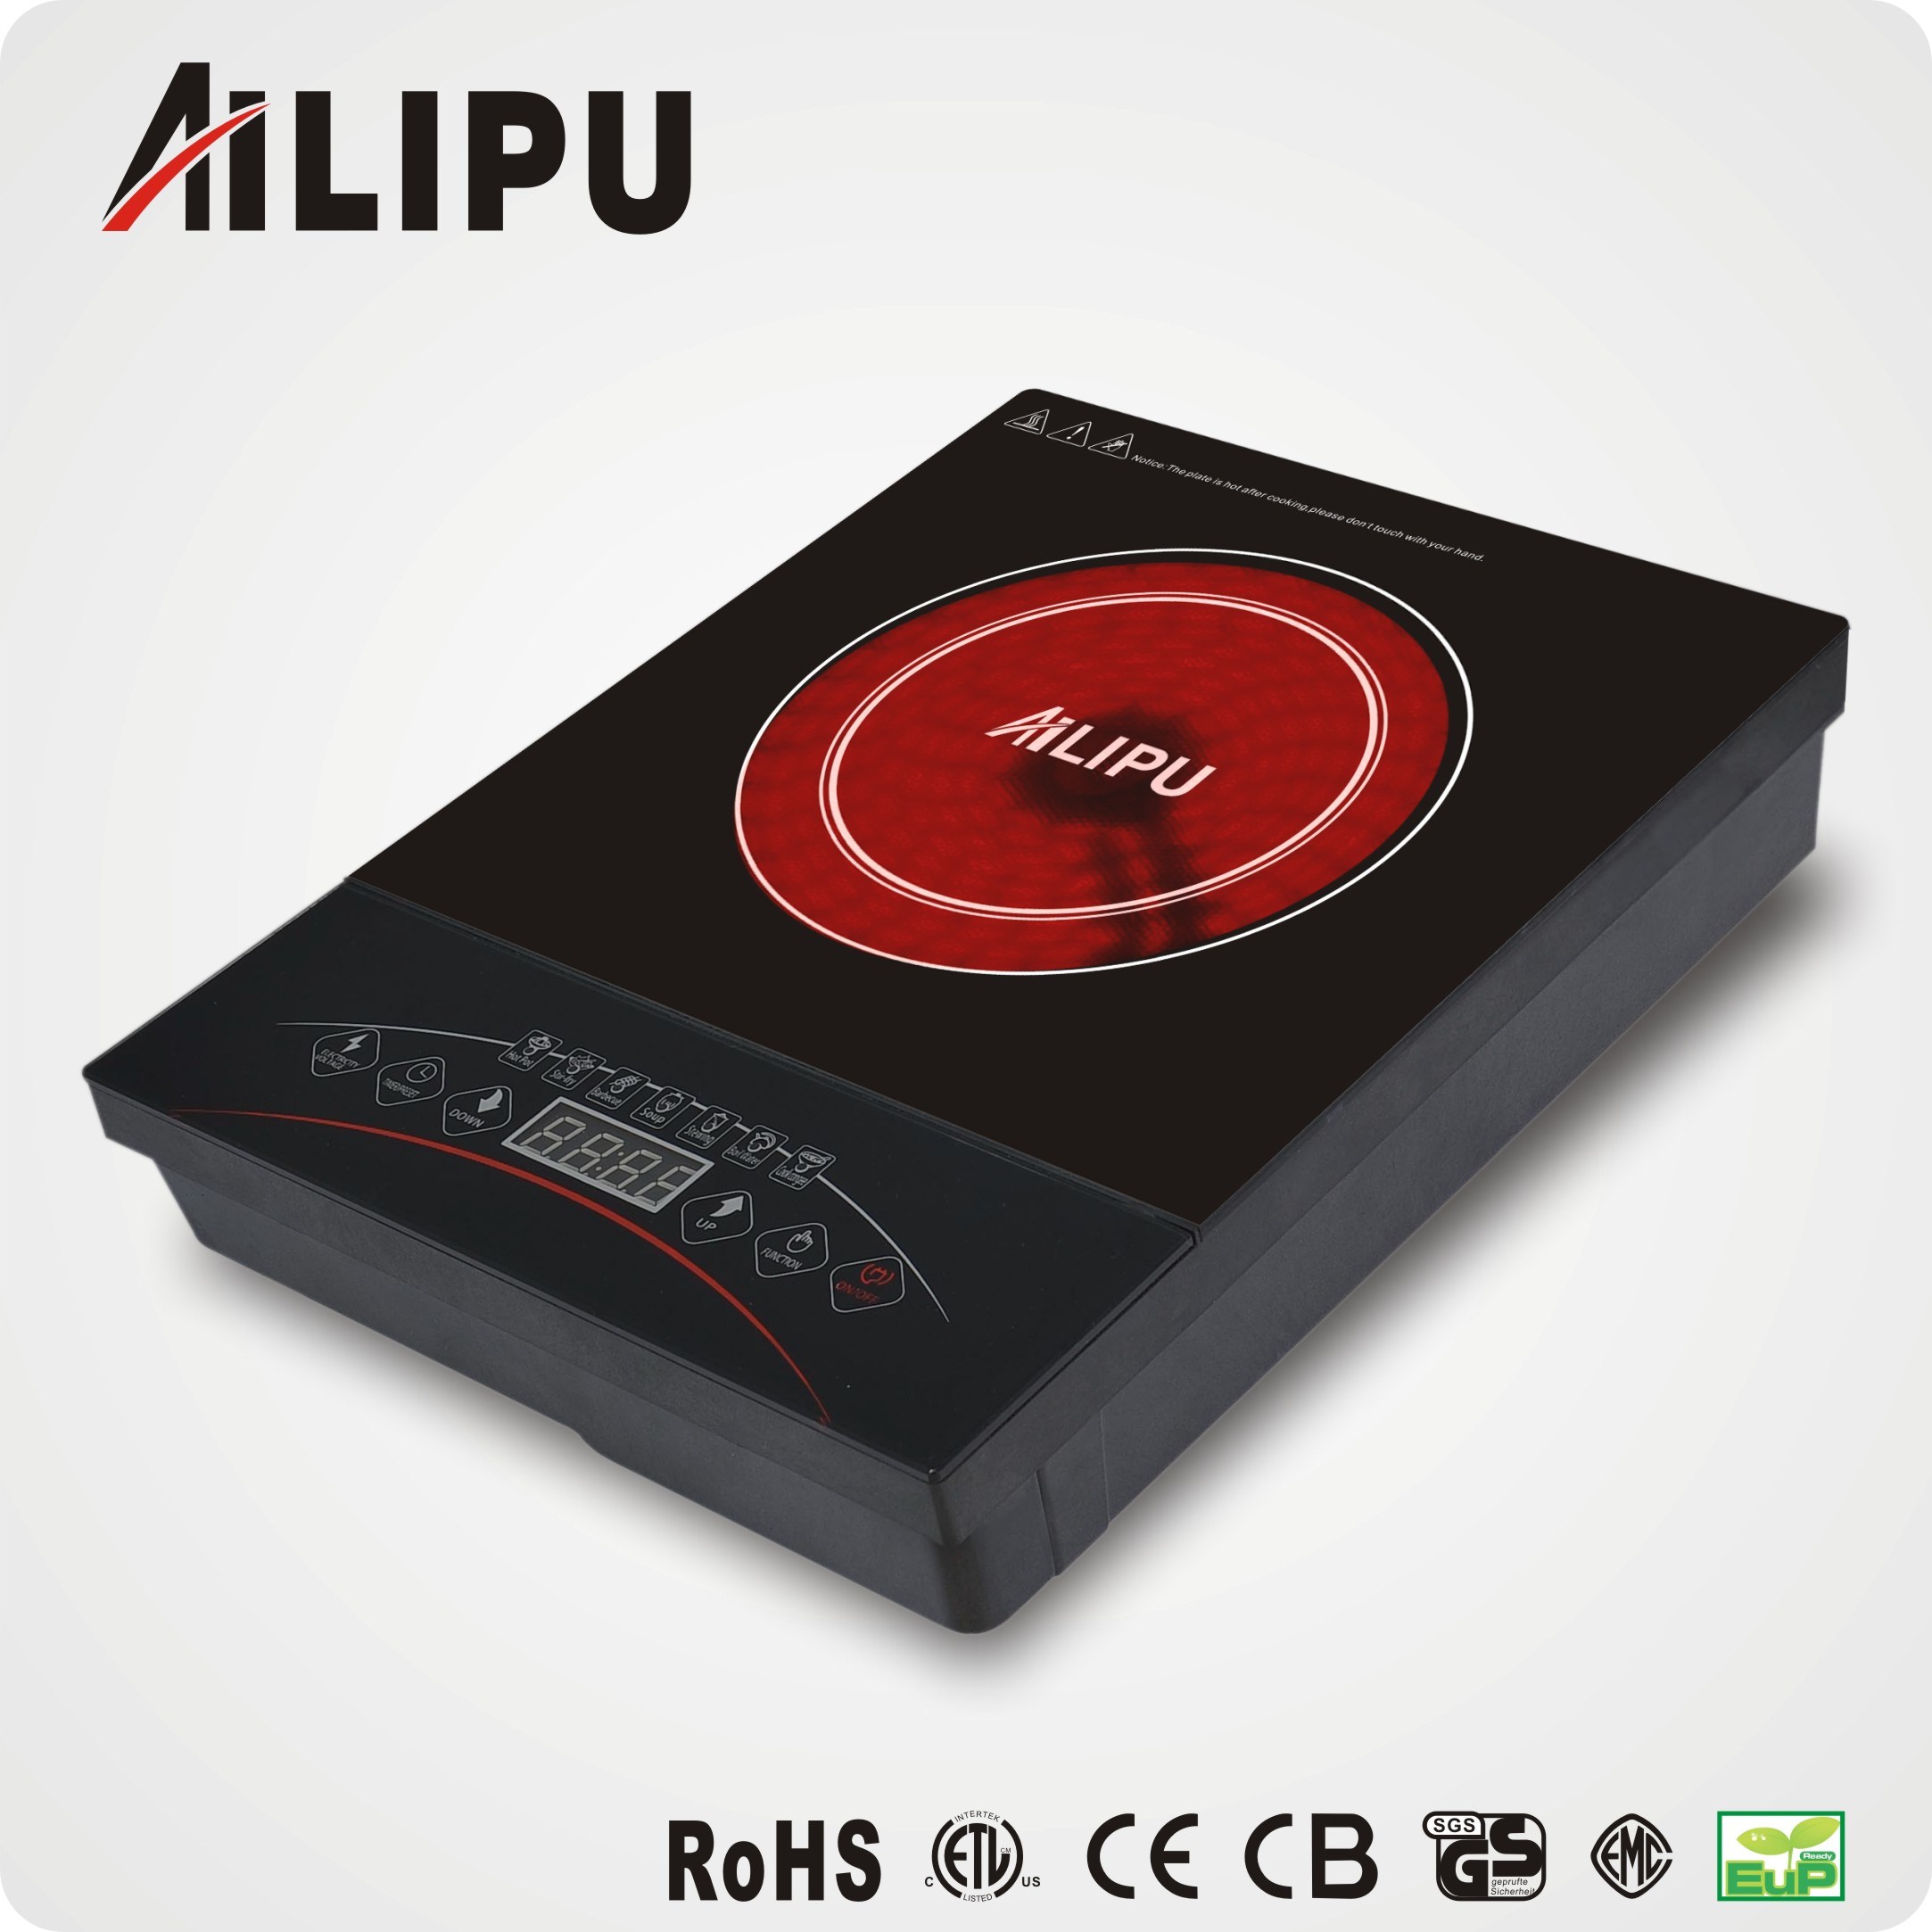 7 Multi Cooking Function Ceramic Cooktop with Sensor Touch